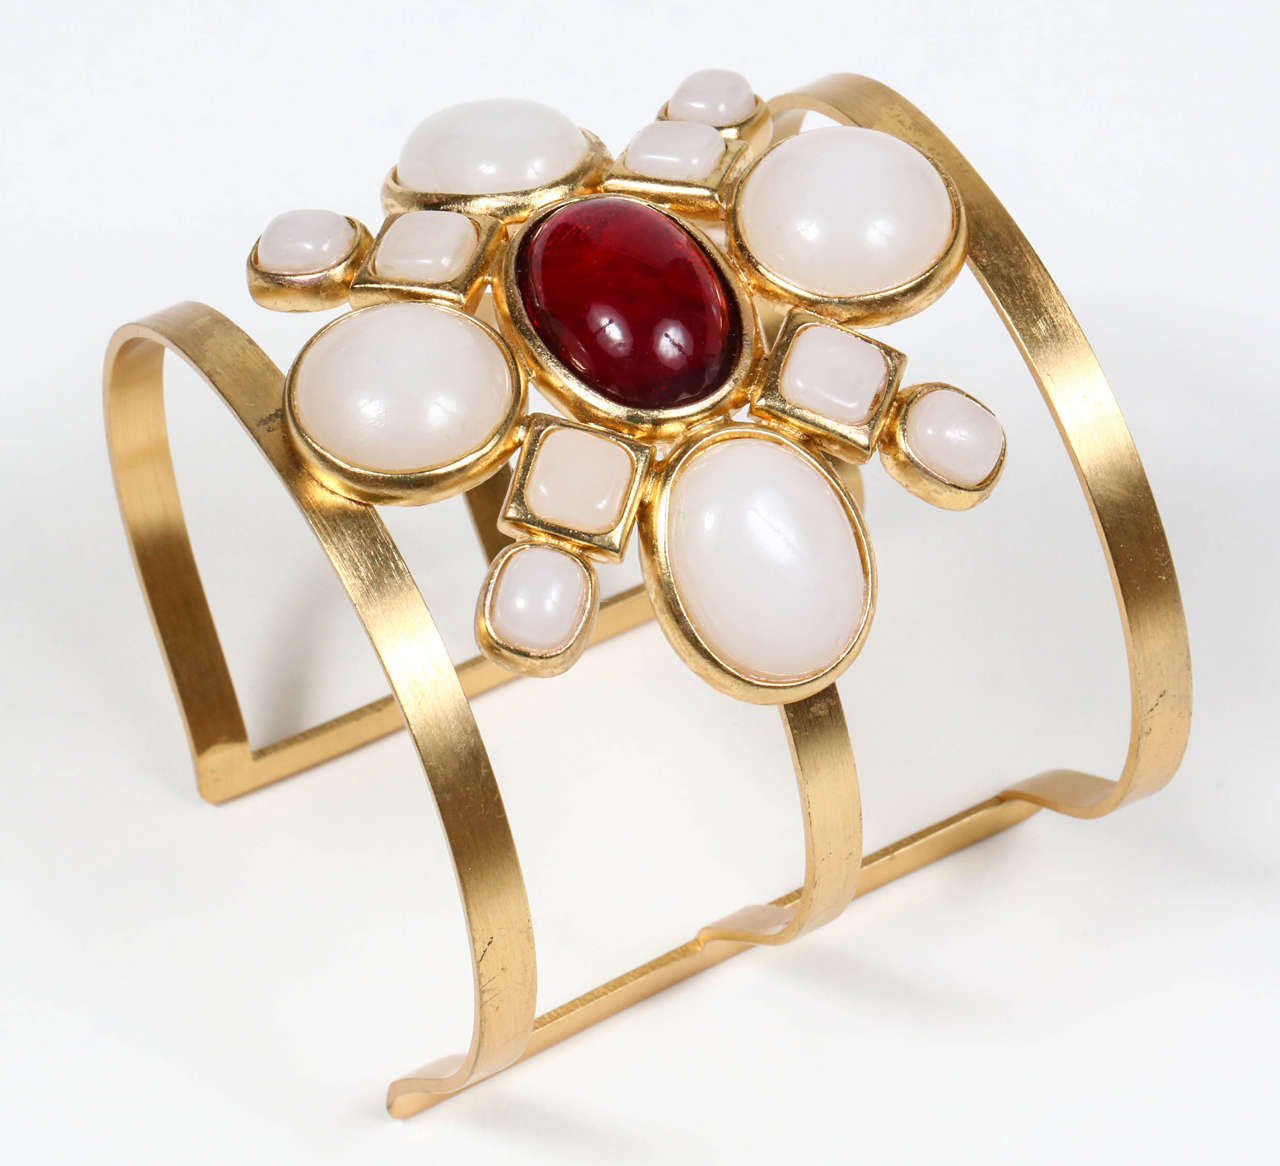 A striking gilt cuff featuring white and ruby red poured glass cabochons, designed to be worn on the upper arm. Marked on the band 